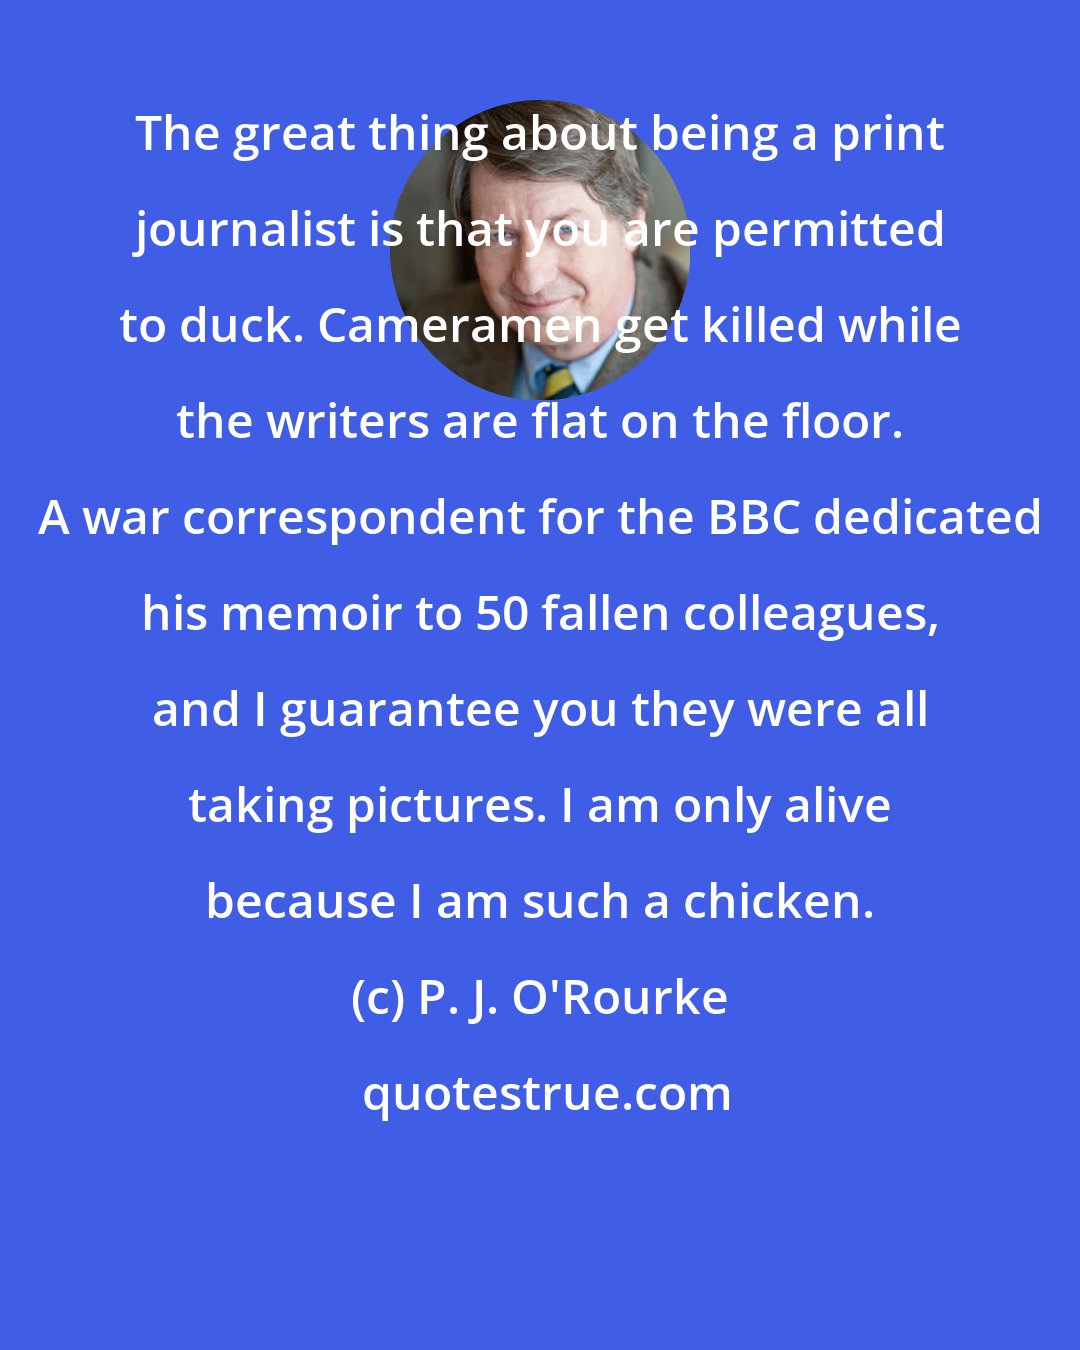 P. J. O'Rourke: The great thing about being a print journalist is that you are permitted to duck. Cameramen get killed while the writers are flat on the floor. A war correspondent for the BBC dedicated his memoir to 50 fallen colleagues, and I guarantee you they were all taking pictures. I am only alive because I am such a chicken.